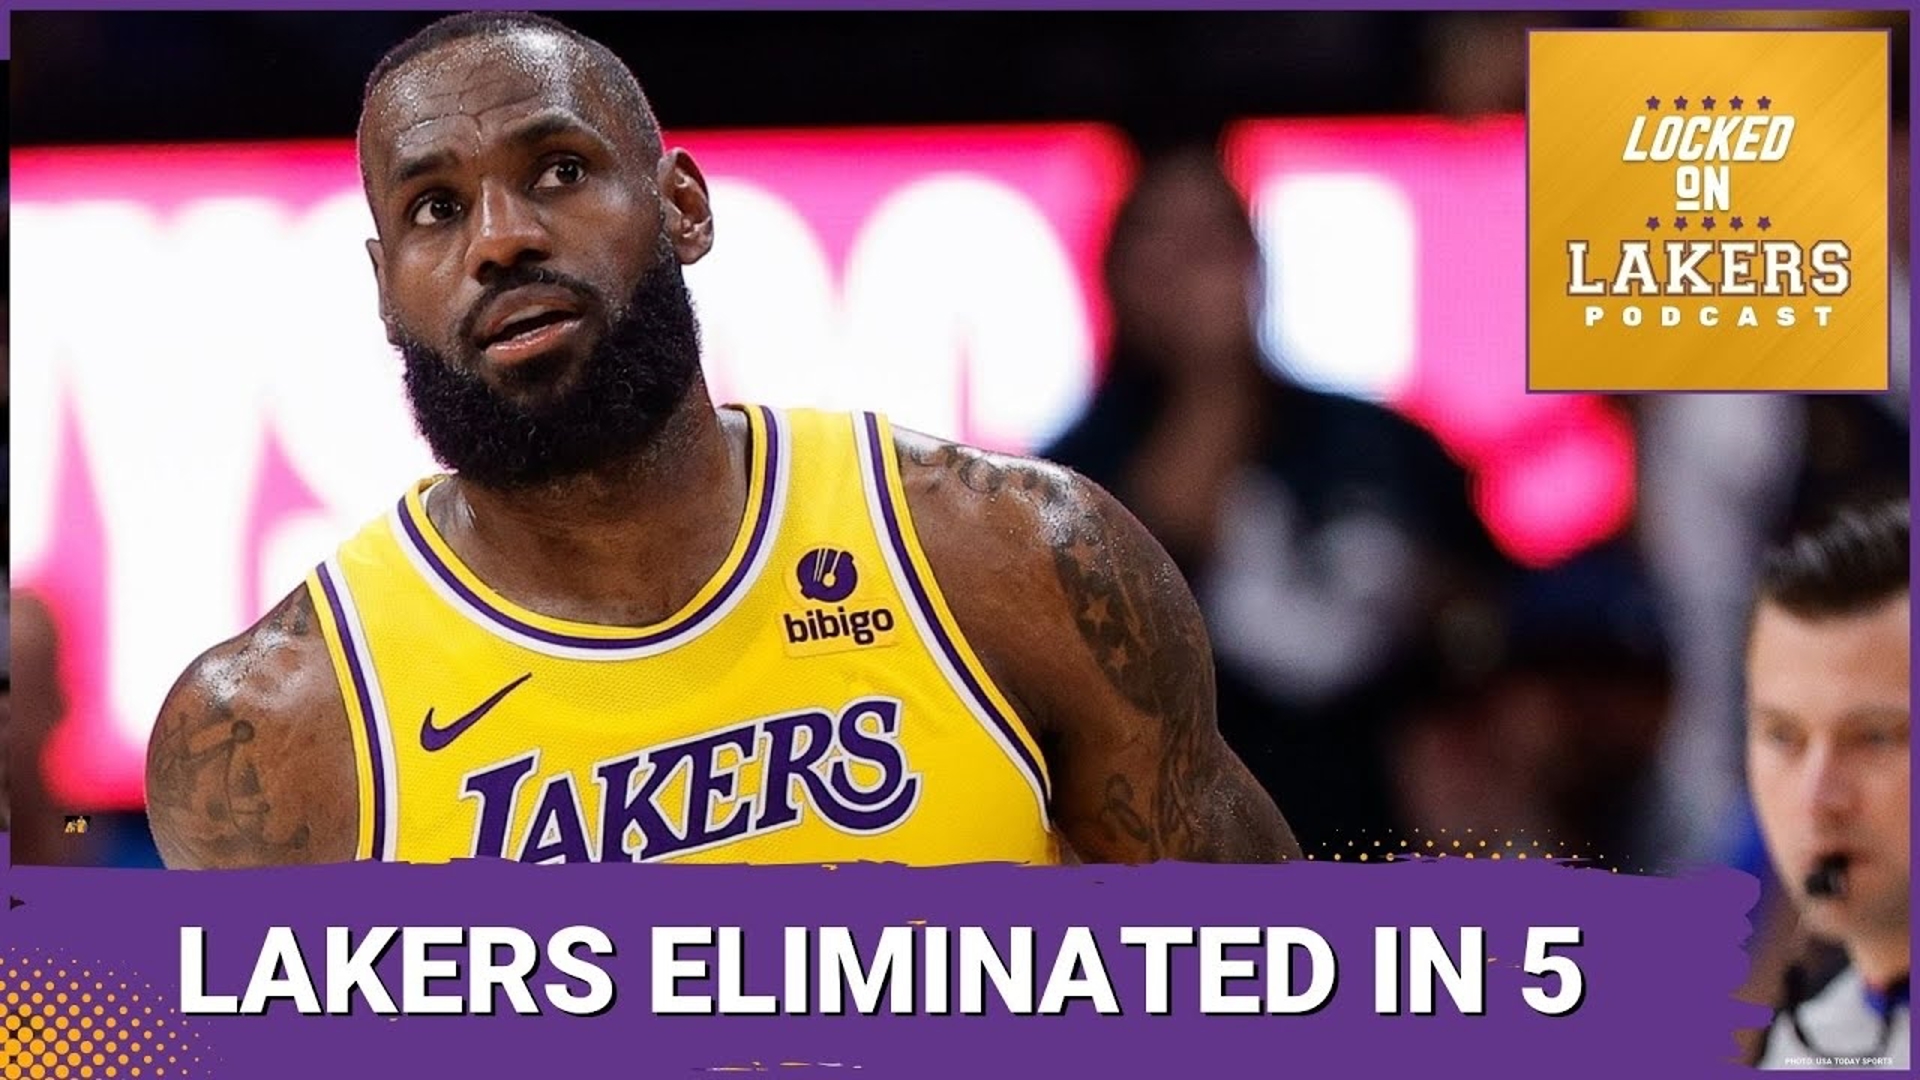 The Lakers went down swinging, but they went down. Really, the issue wasn't that they lost this game, but that they lost Game 2. What's next for this team?